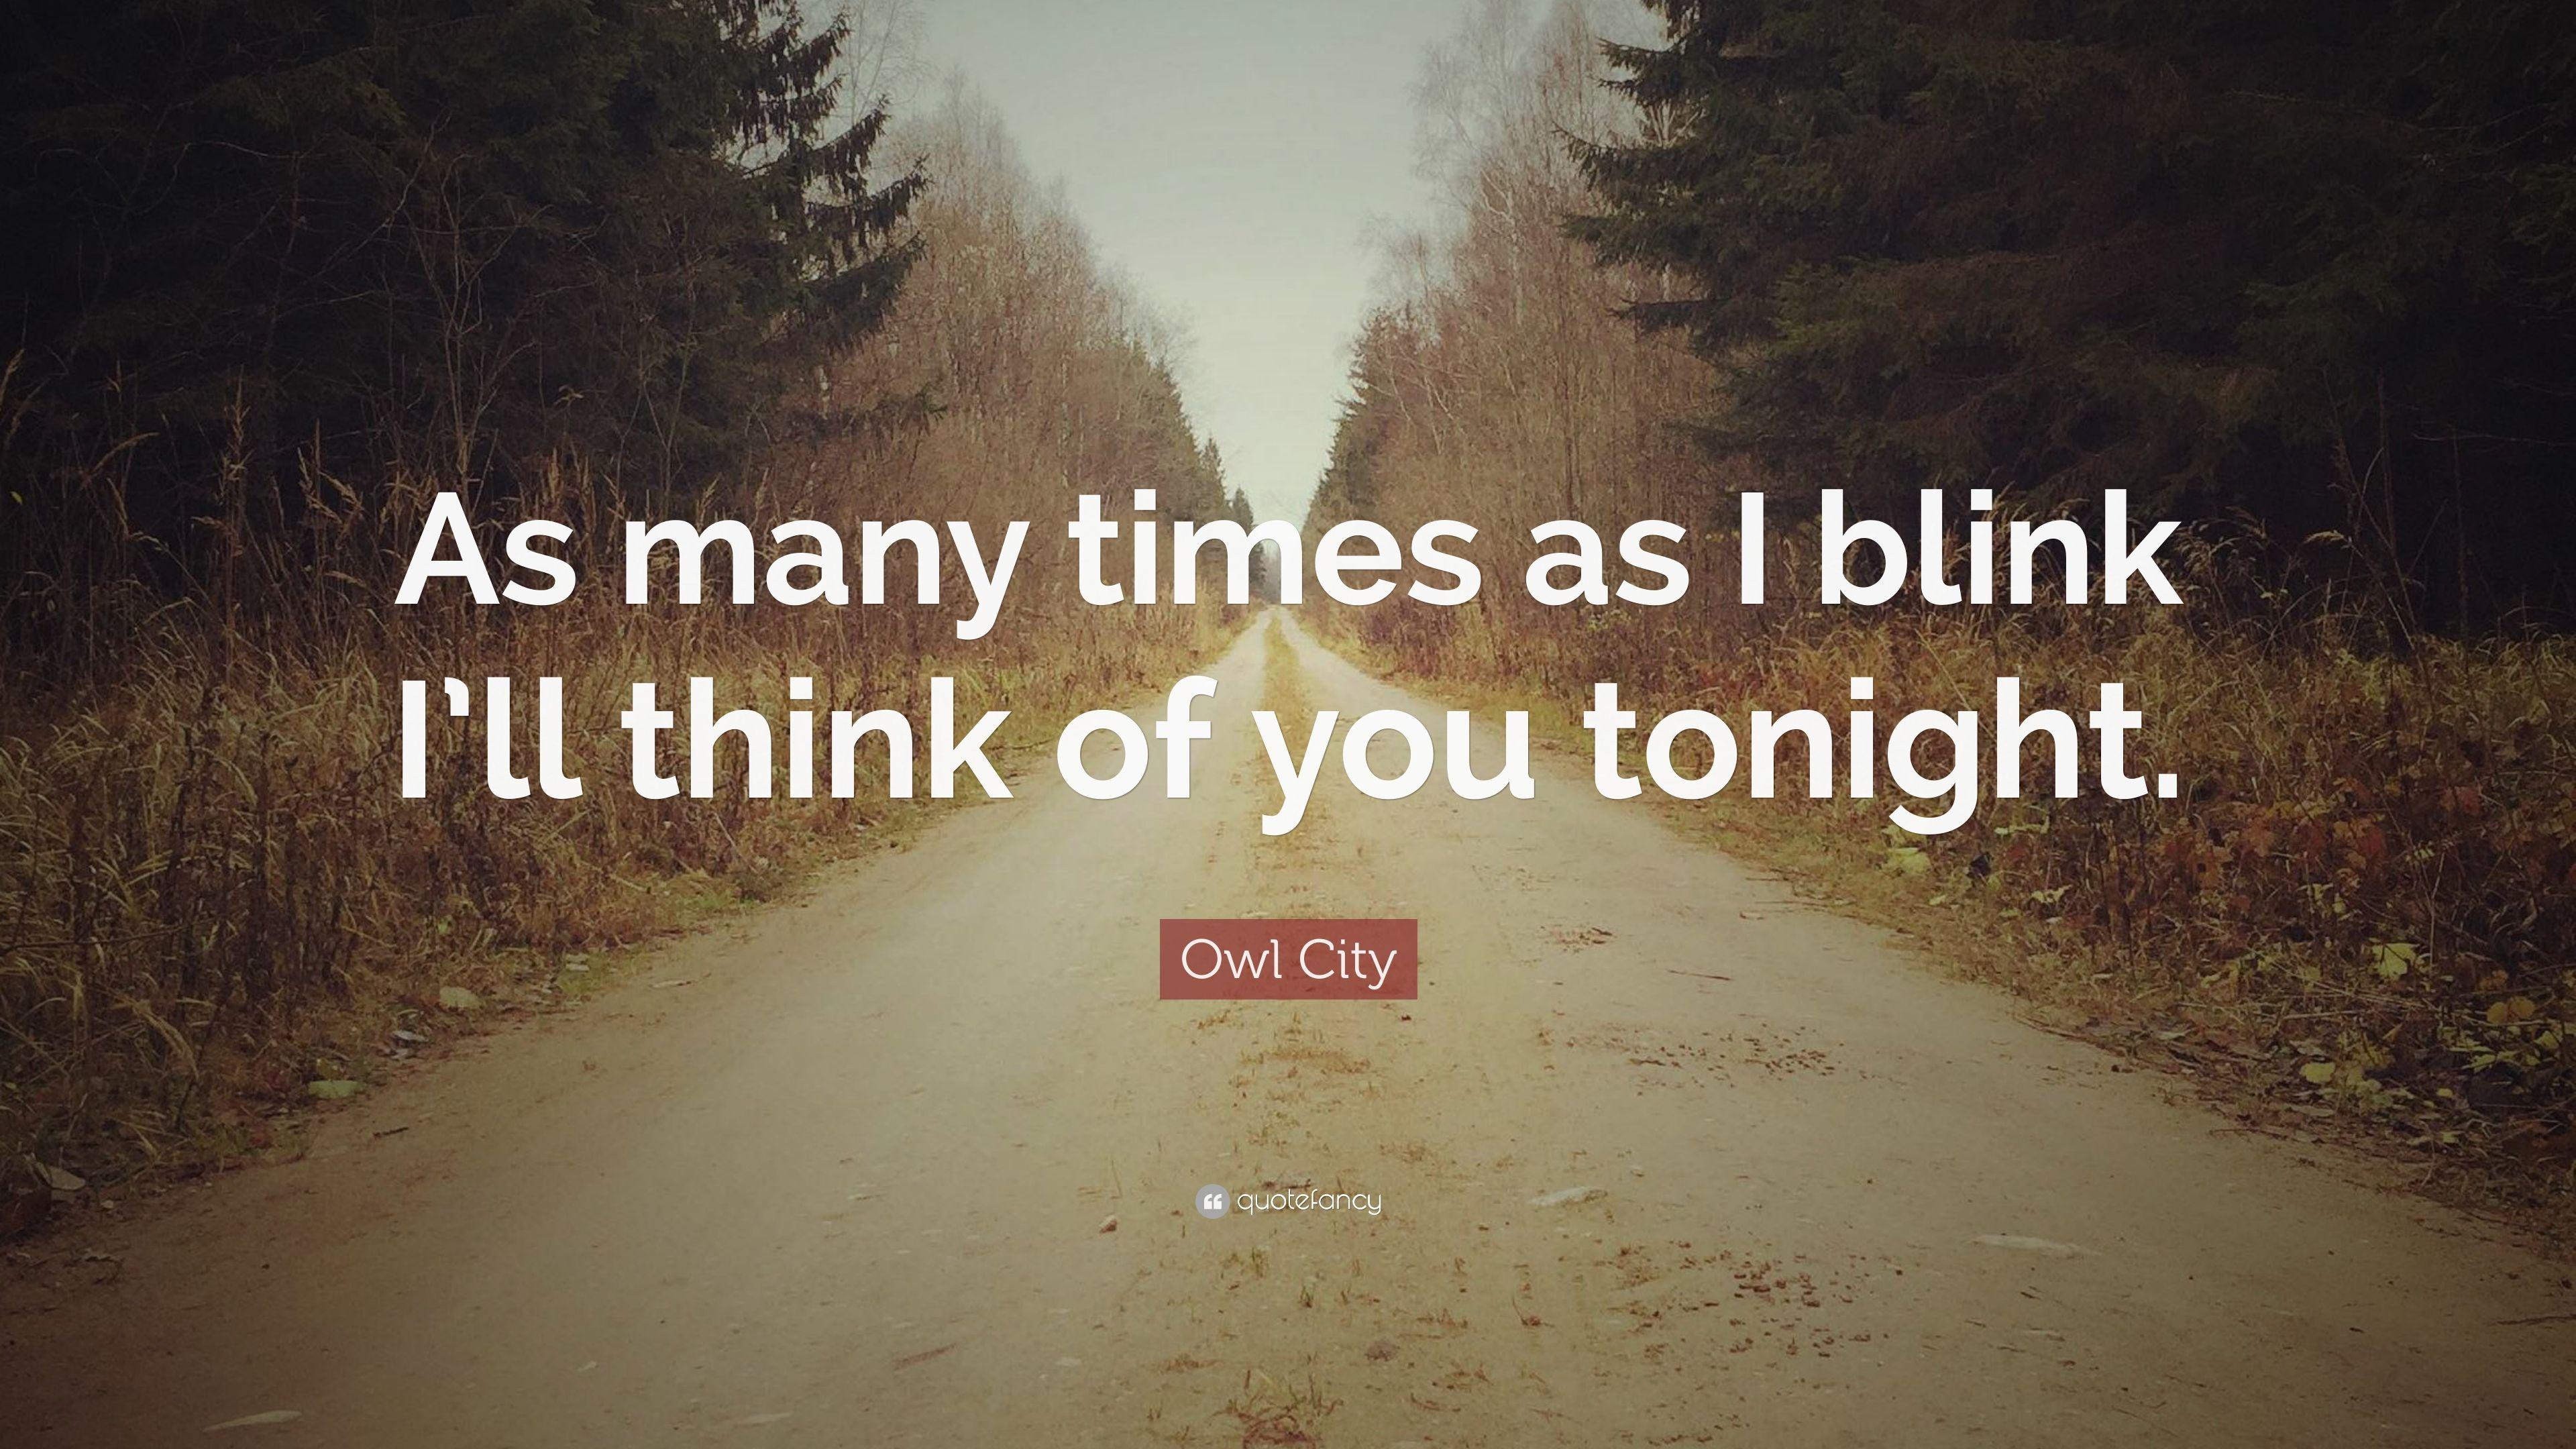 Owl City Quote: “As many times as I blink I'll think of you tonight